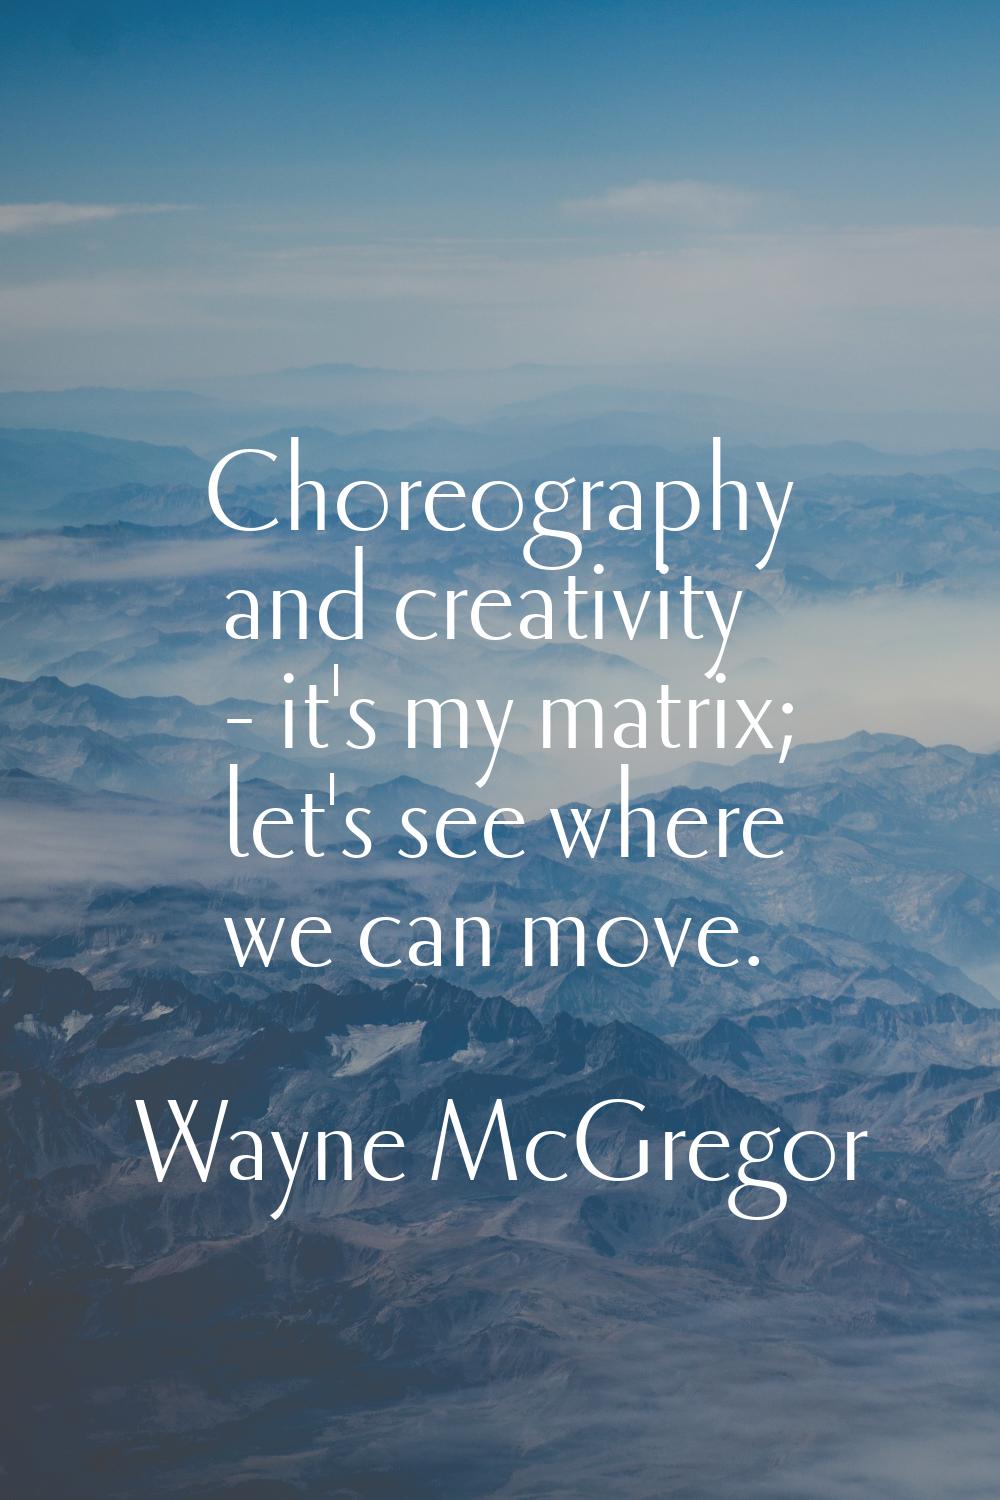 Choreography and creativity - it's my matrix; let's see where we can move.